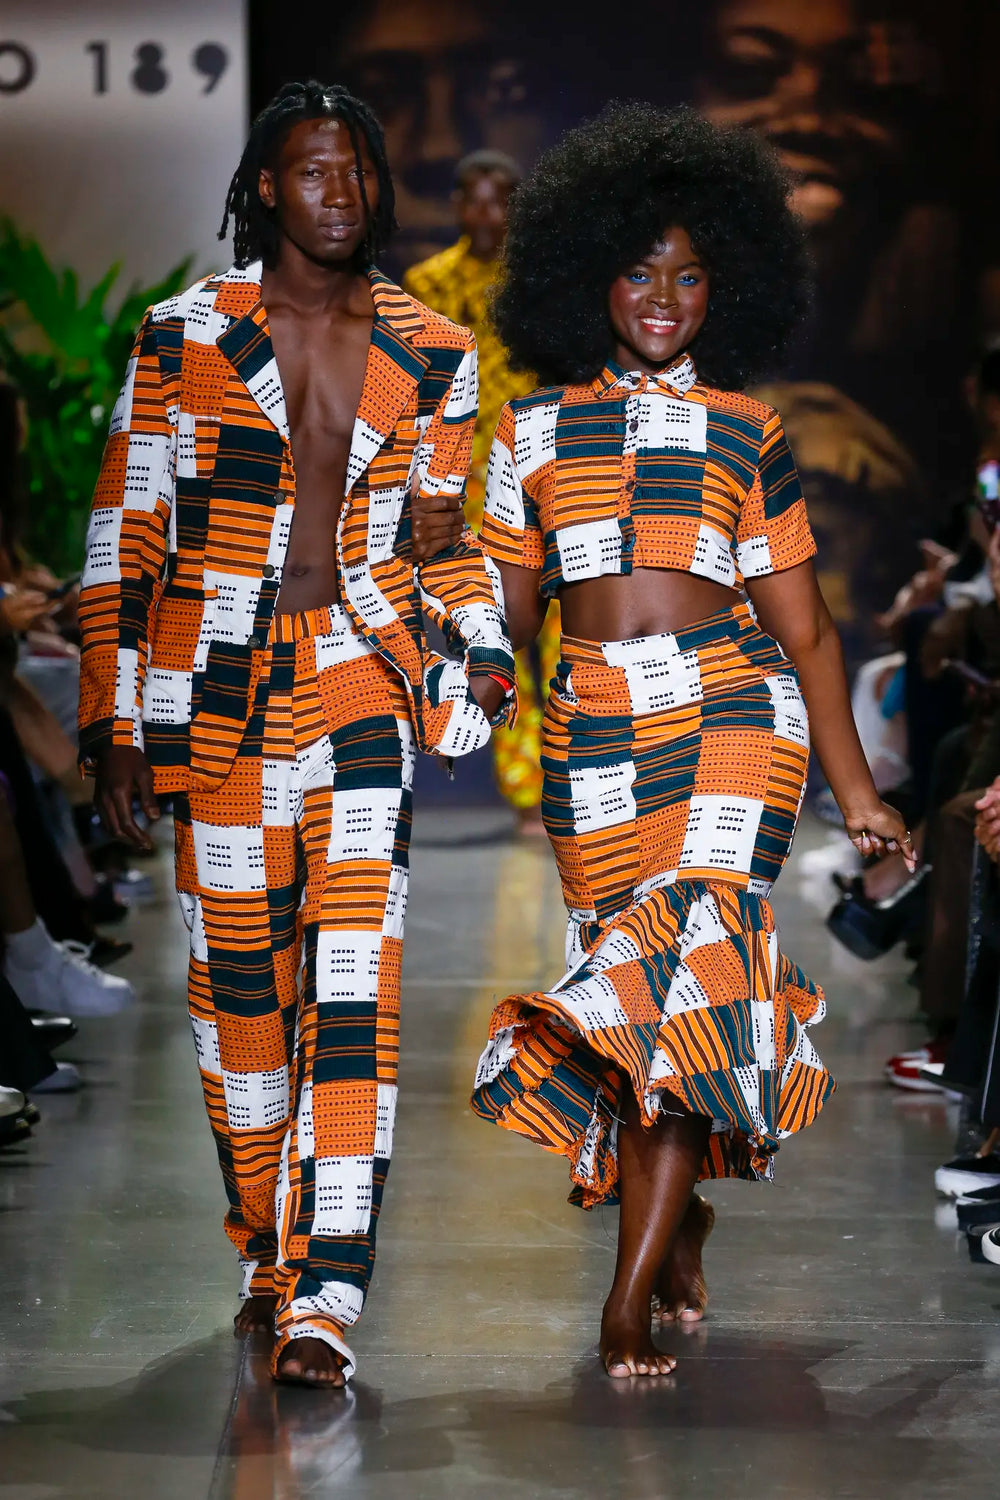 Ghana, Fashion, Africa, diaspora, cotton, dresses, GOWNS, skirts, shirts, tops, womenswear, womens, Handmade, bag, West Africa, Gift, travel, vacation, beach, picnic, pool, swim, sand, family, trip, luxury, resort, spring, summer, concert, gala, event, party, brunch, chic, custom, bespoke, plus-sized, extended sizes, inclusivity, celebration, special, cotton, packable, luxury, accessible, new, novelty, classic